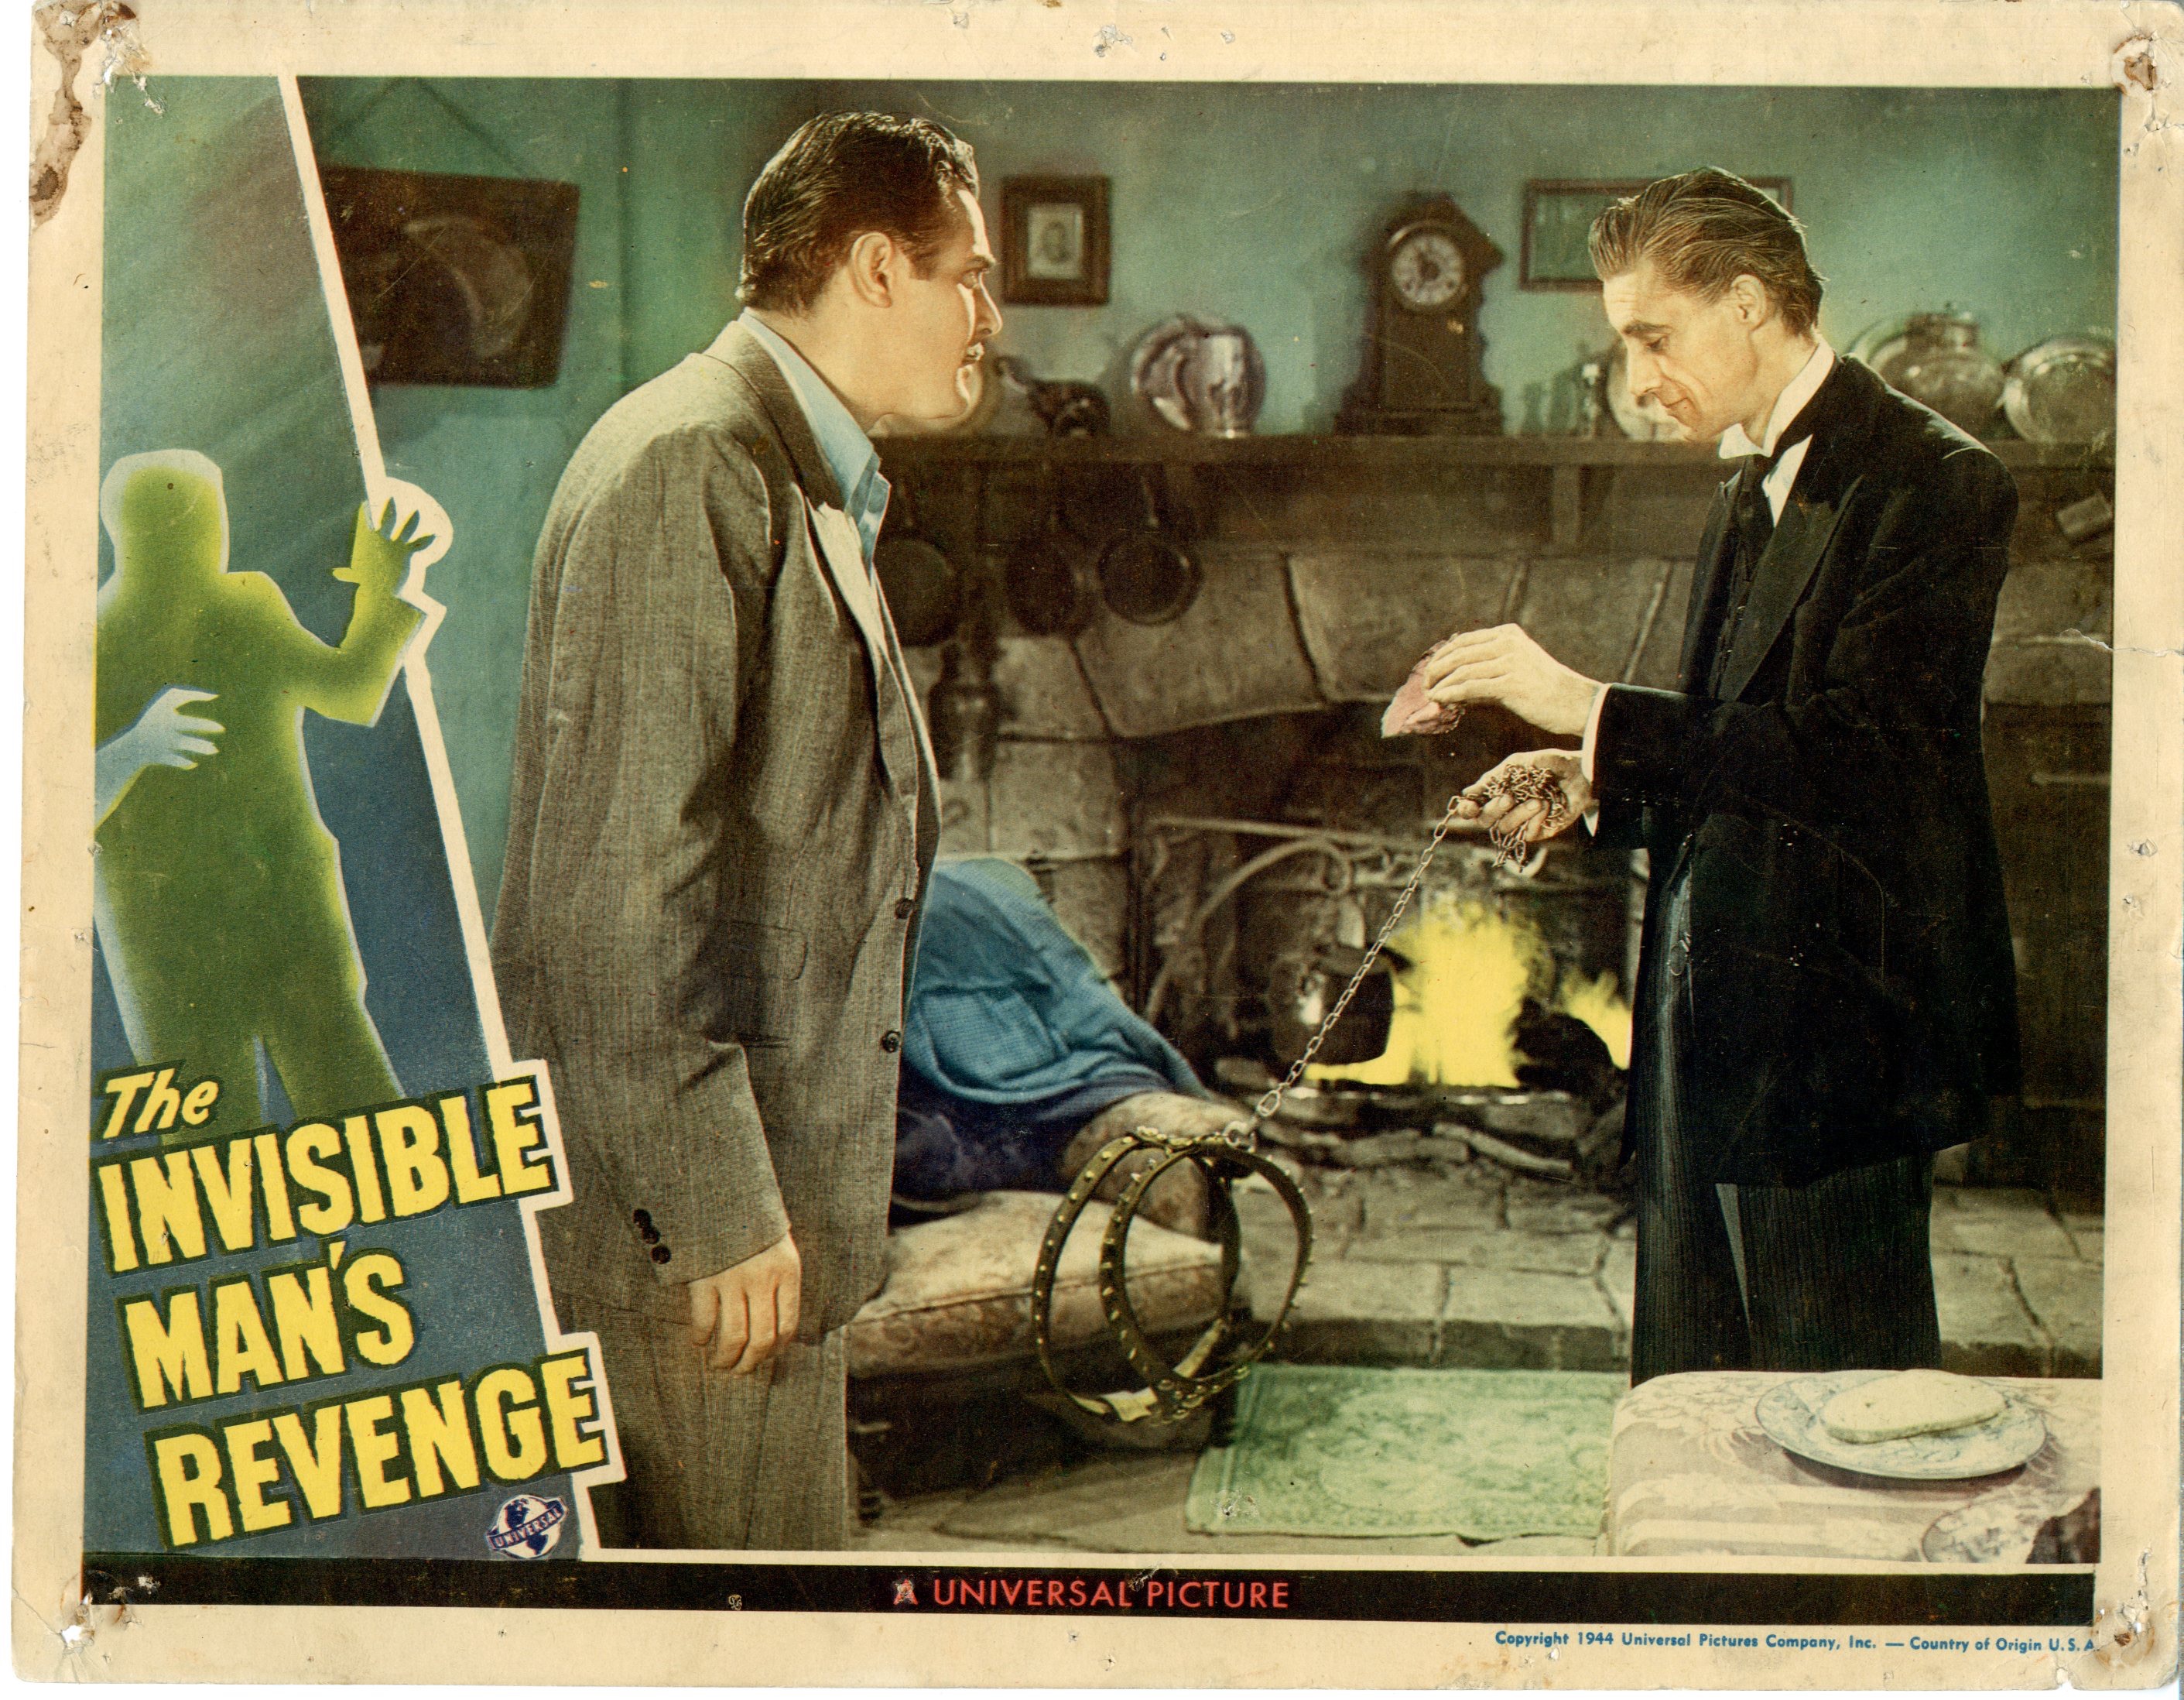 Universal Horror: The Invisible Man's Revenge Movie Poster release 1944